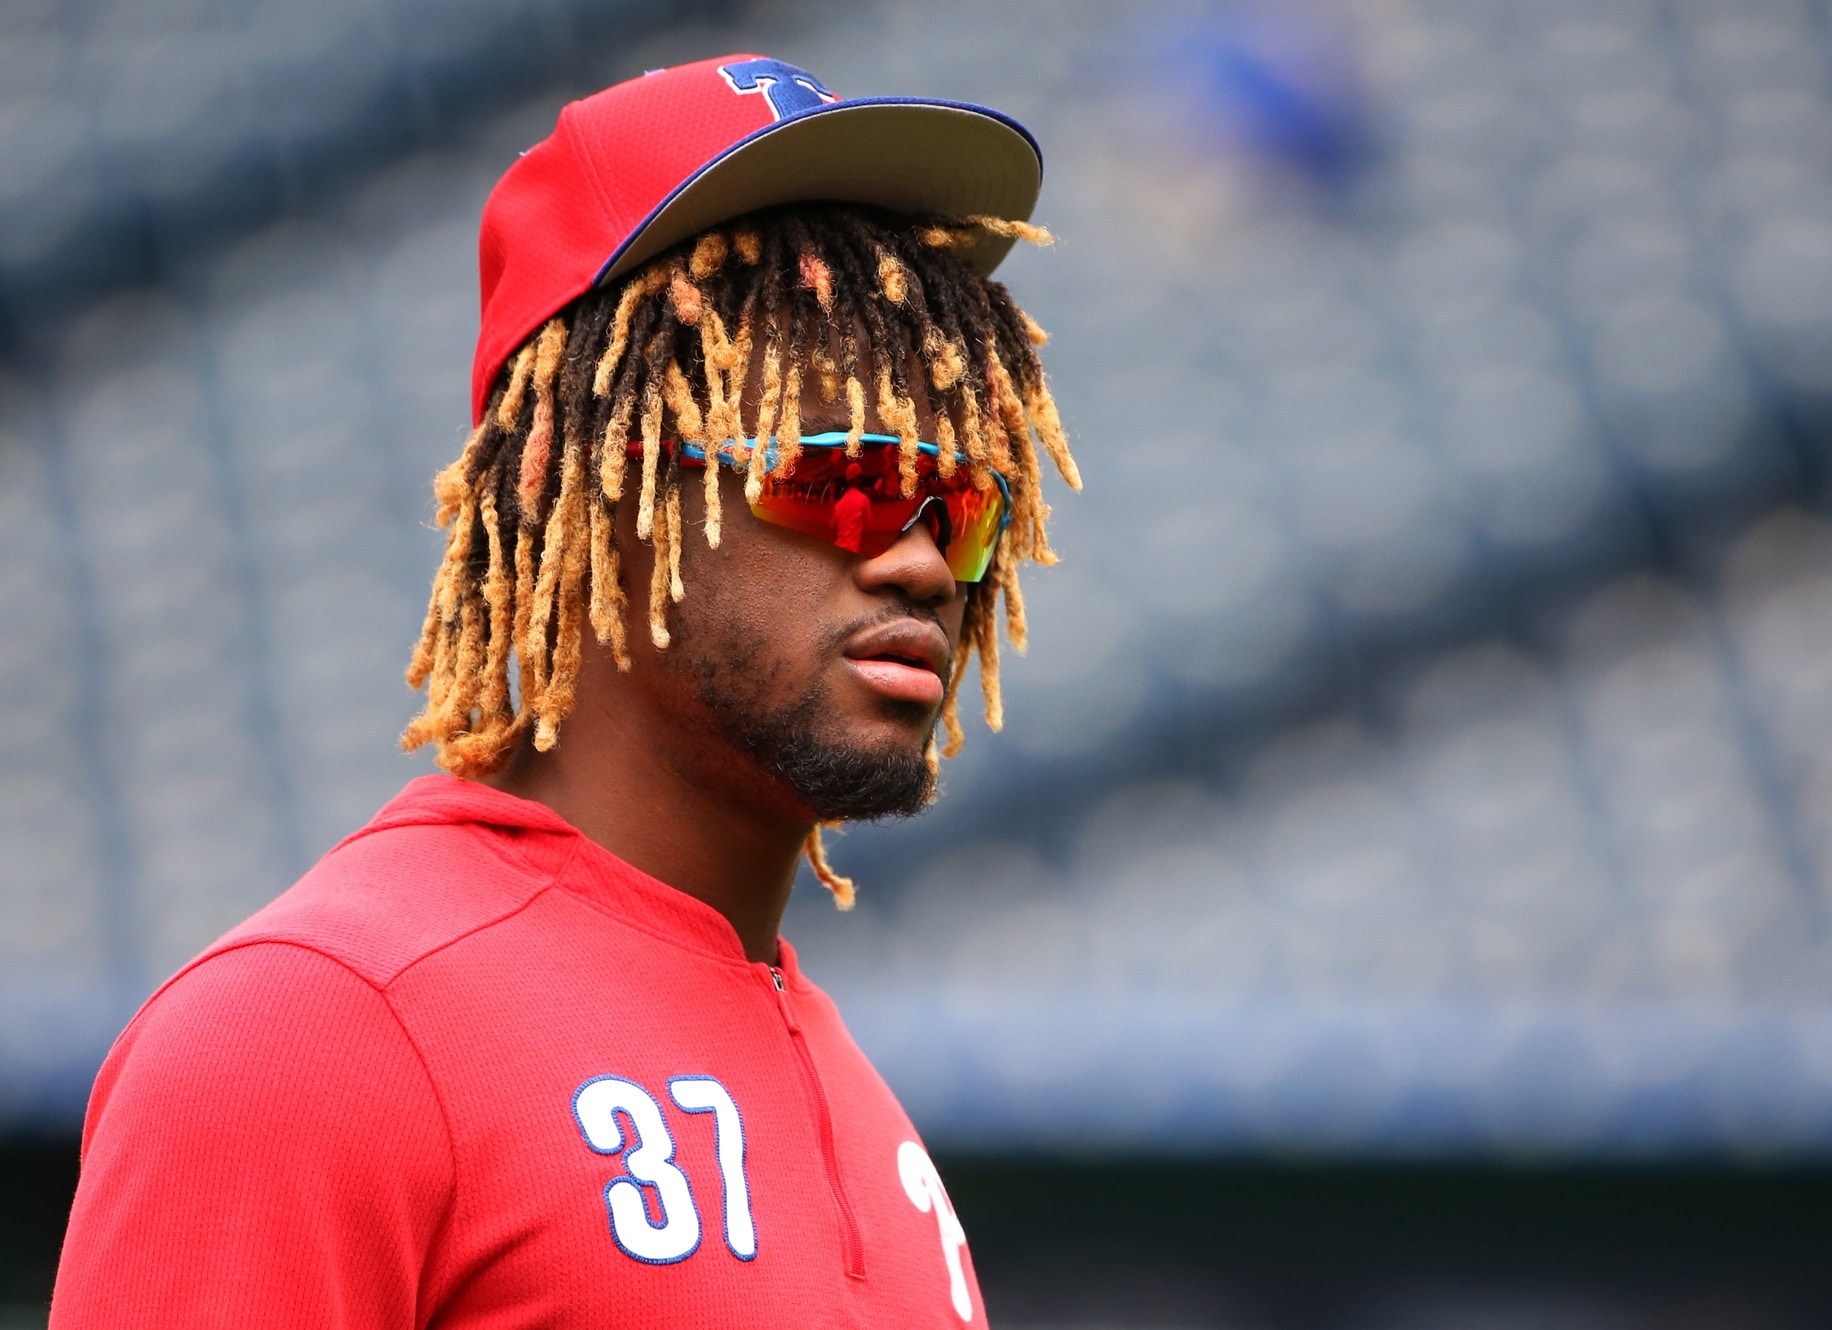 Odubel Herrera is Saying and Doing the Right Things – Does He Have Any Shot at a Second Chance?